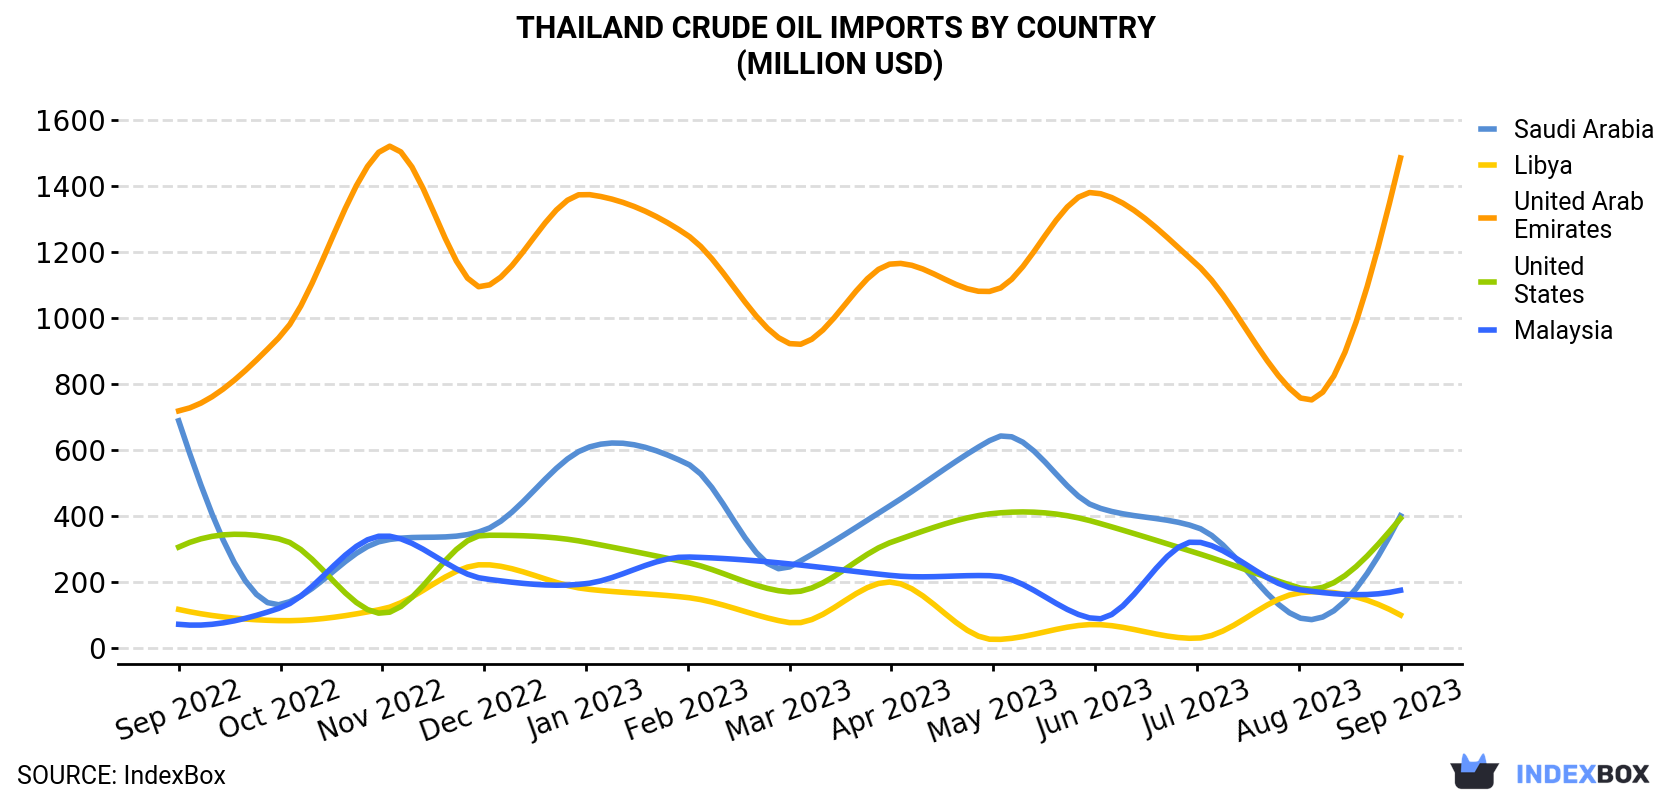 Thailand Crude Oil Imports By Country (Million USD)